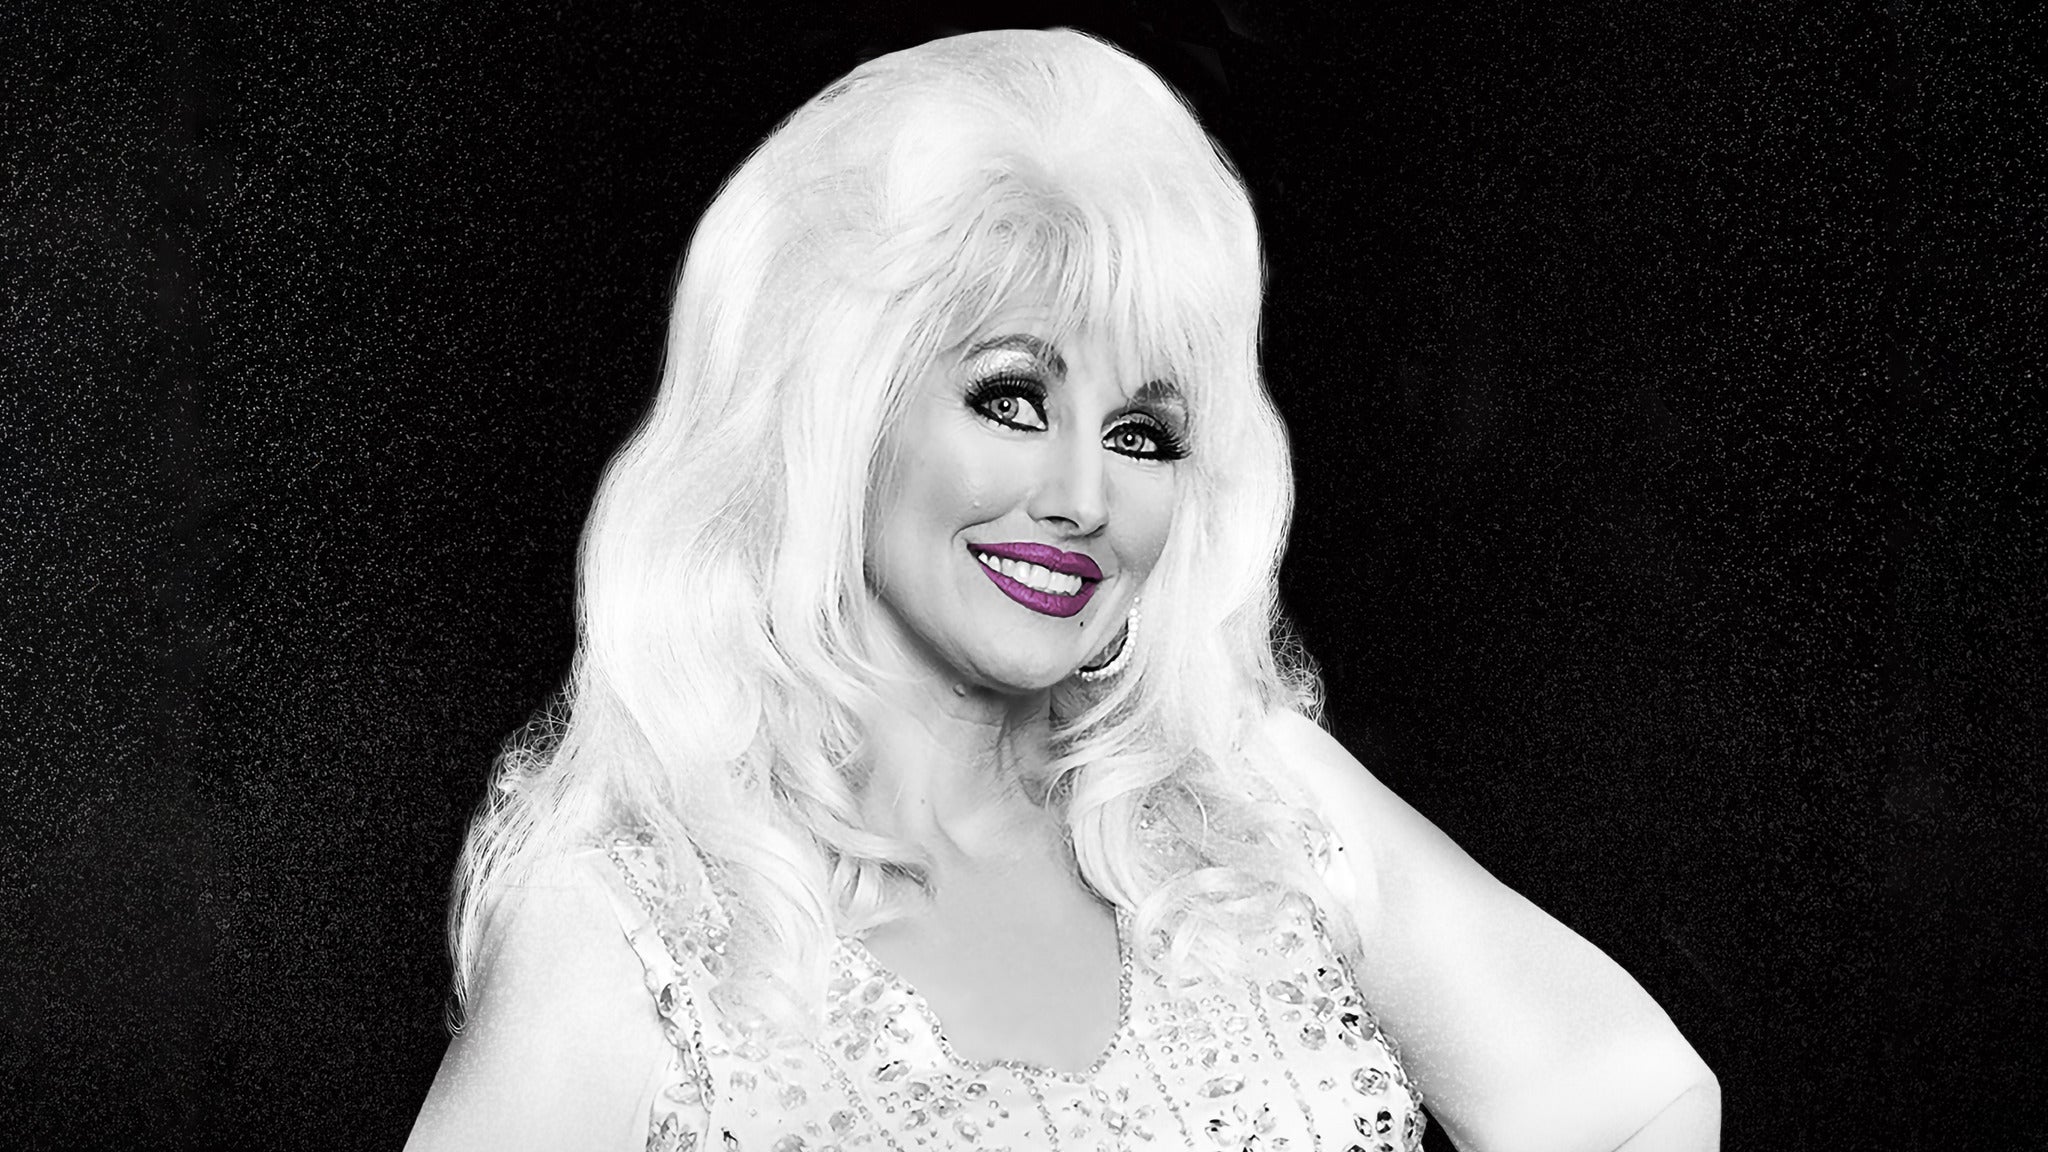 Dolly Parton Tribute in Enoch promo photo for Players Club, Media and Facebook presale offer code